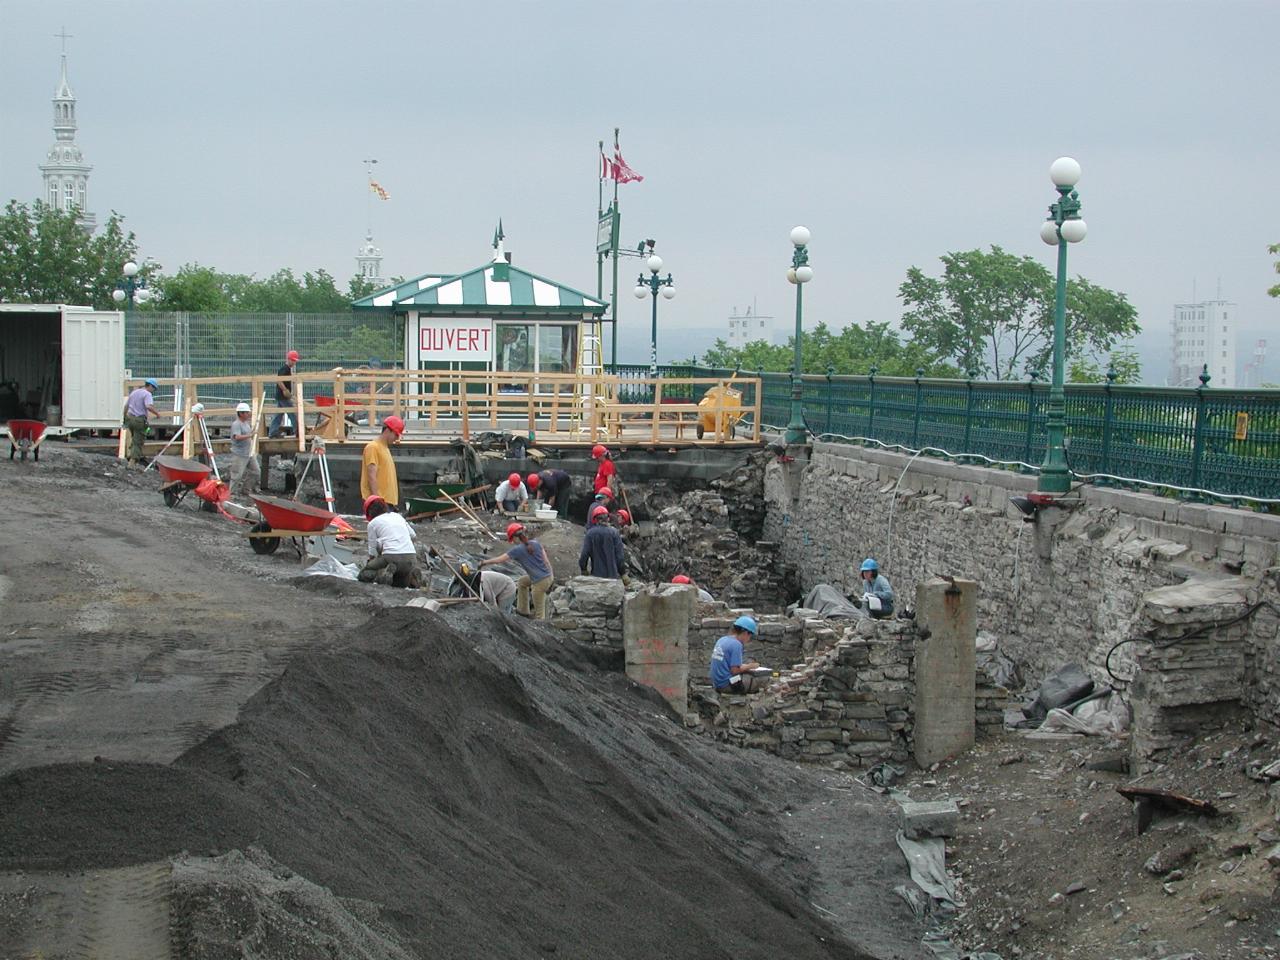 Terrasse Dufferin is being reconstructed, and examined as an archeology site